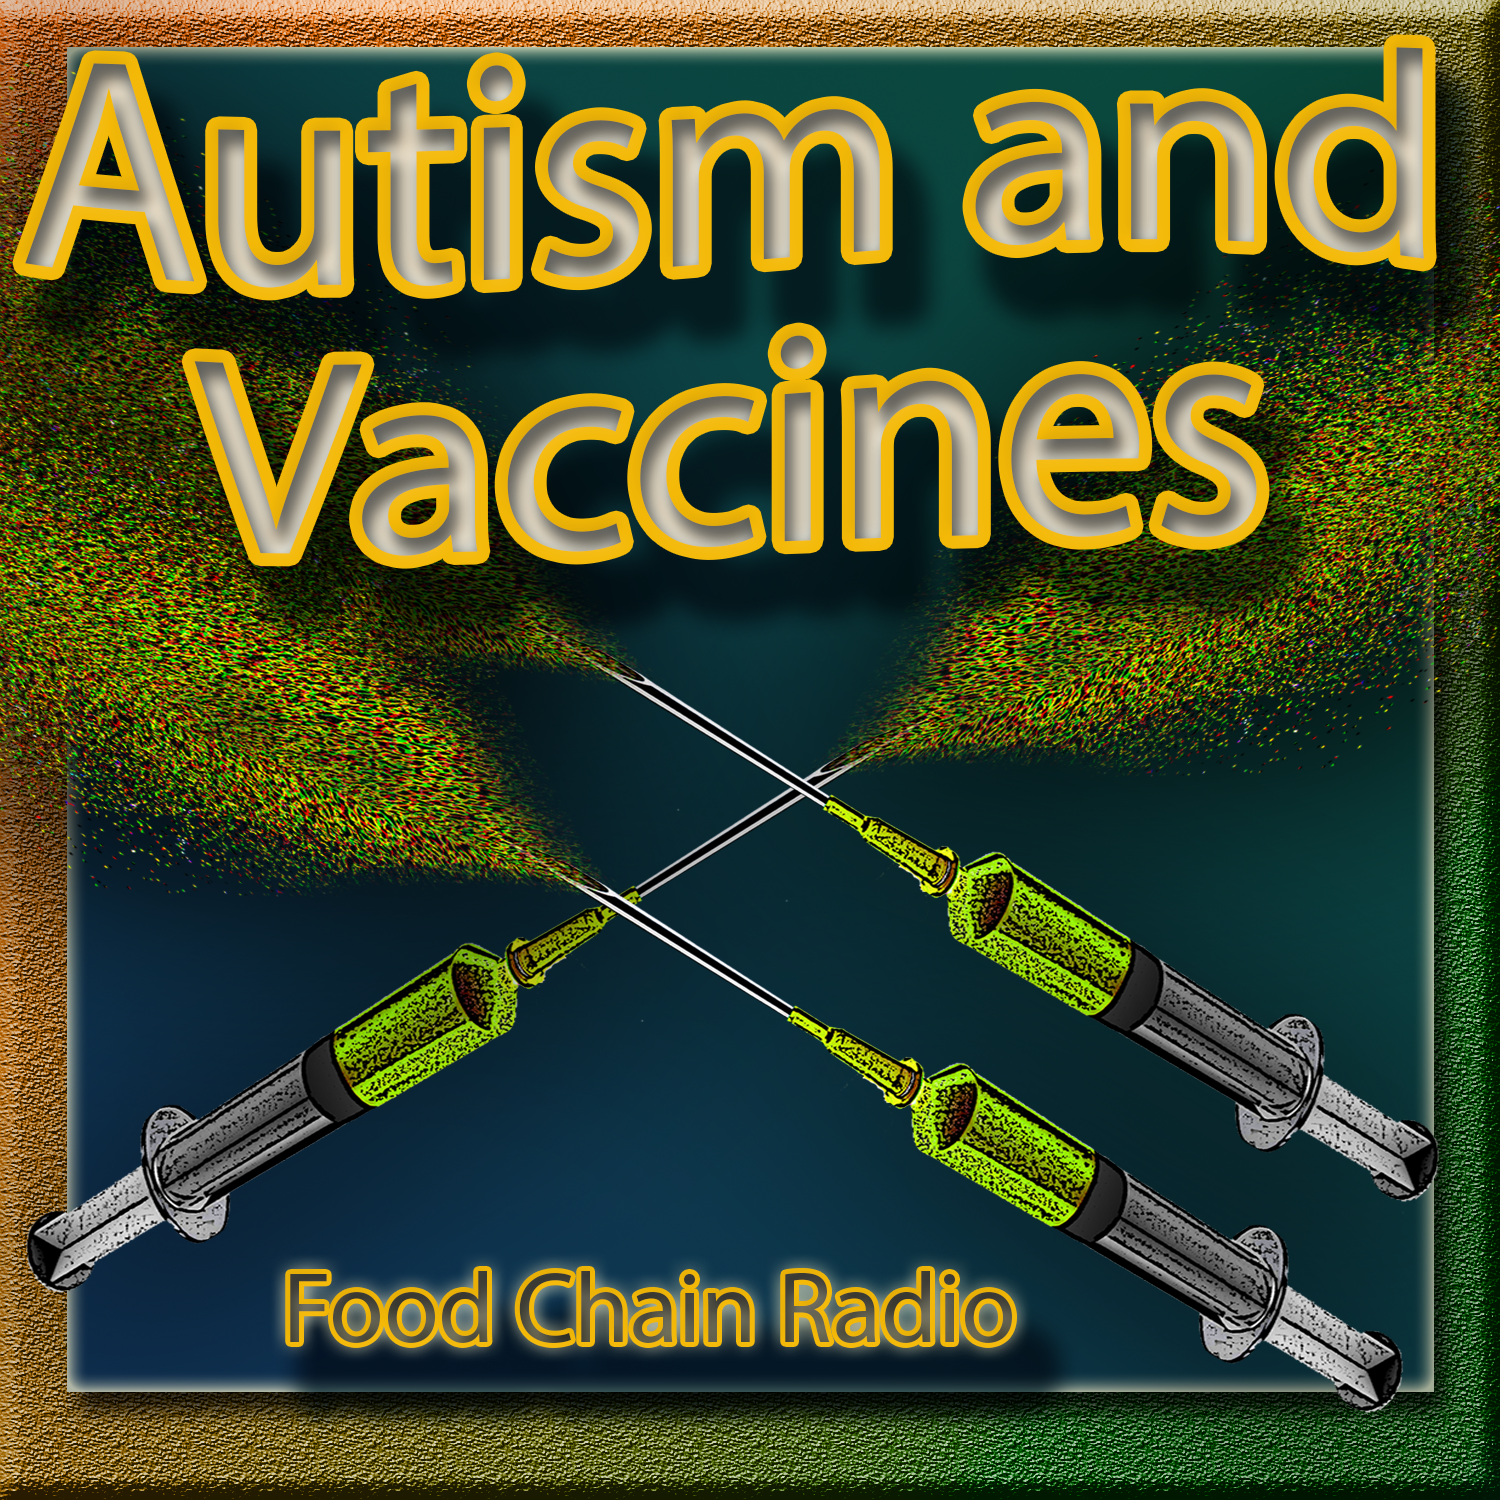 Michael Olson Food Chain Radio – In 1981, one child in 10,000 was diagnosed with autism. Today, one child in 50 is autistic.